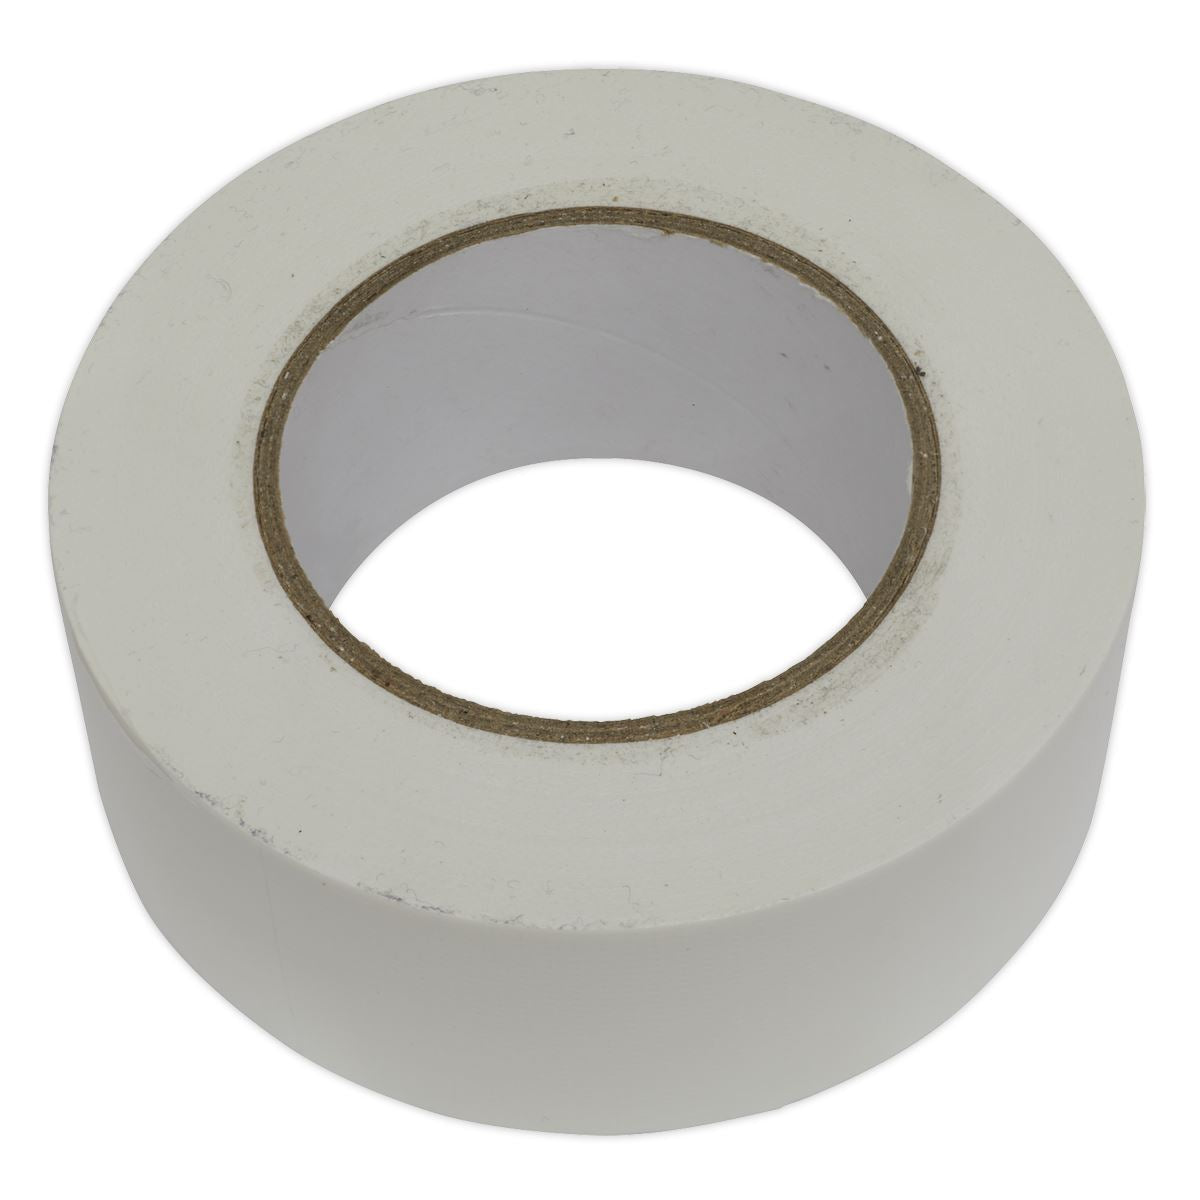 Sealey Duct Tape 50mm x 50m White